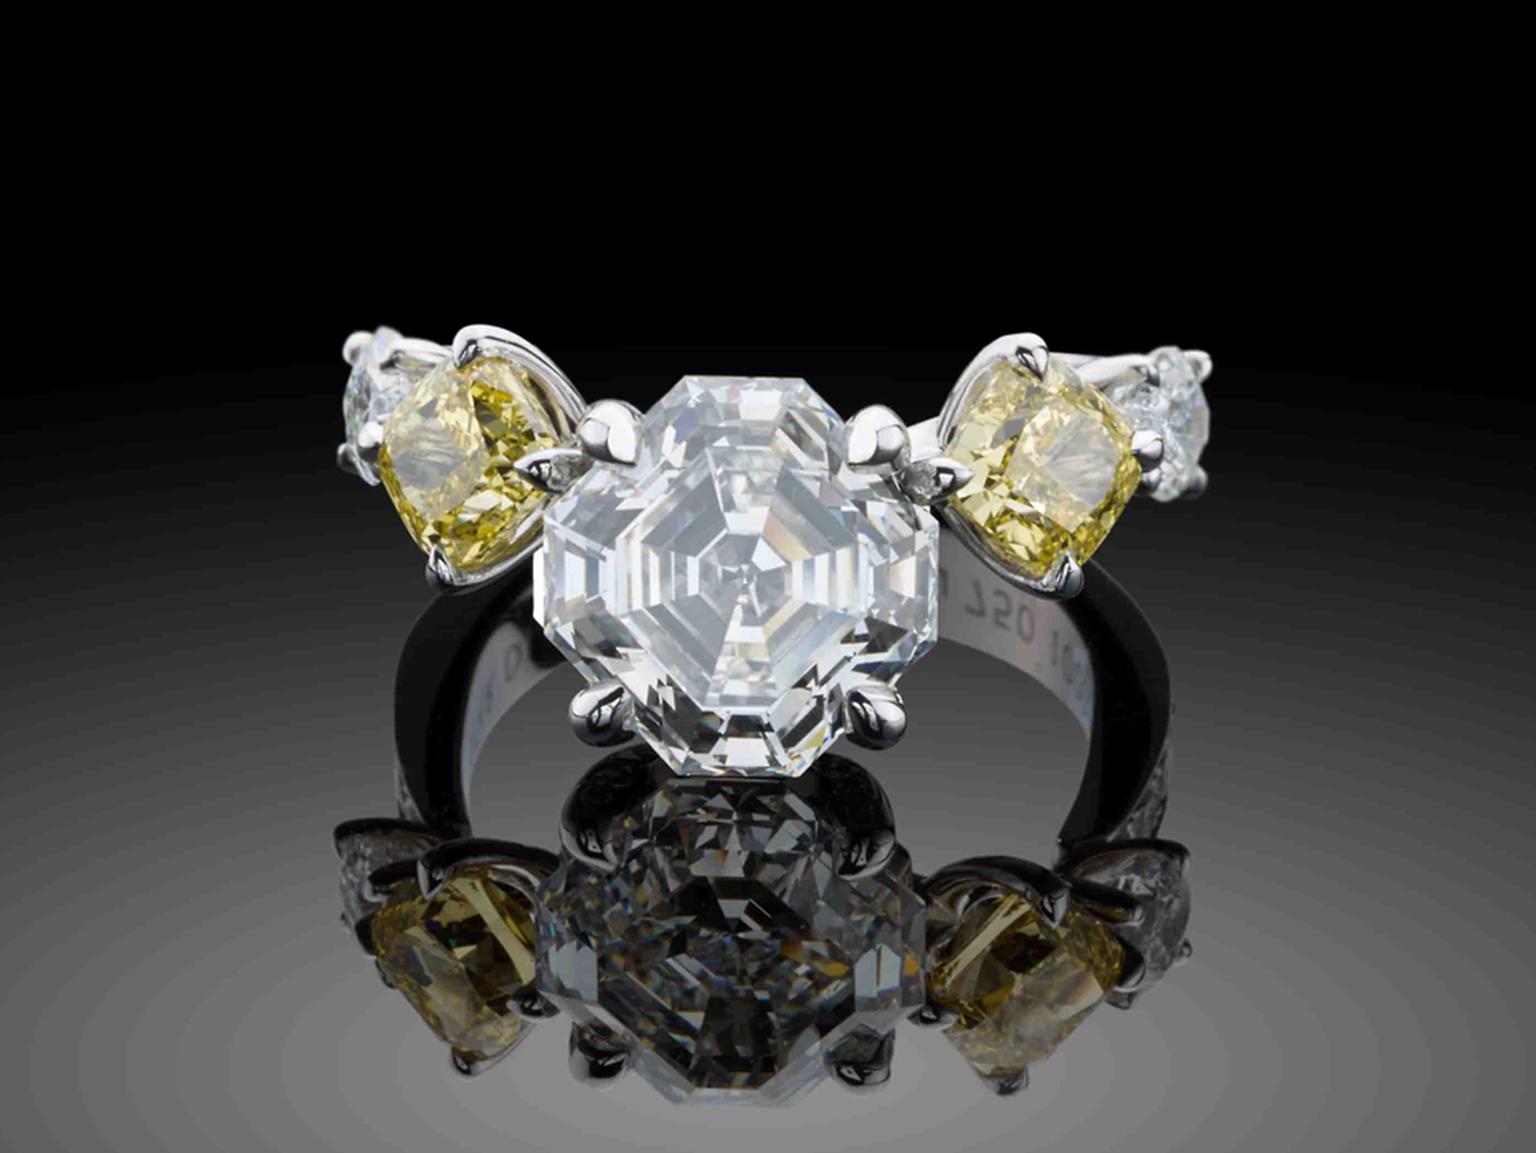 Star Diamond asymmetrical diamond engagement ring with a 4.20ct Asscher-cut diamond flanked by two Fancy Vivid Yellow cushion-cut diamonds (£275,000).